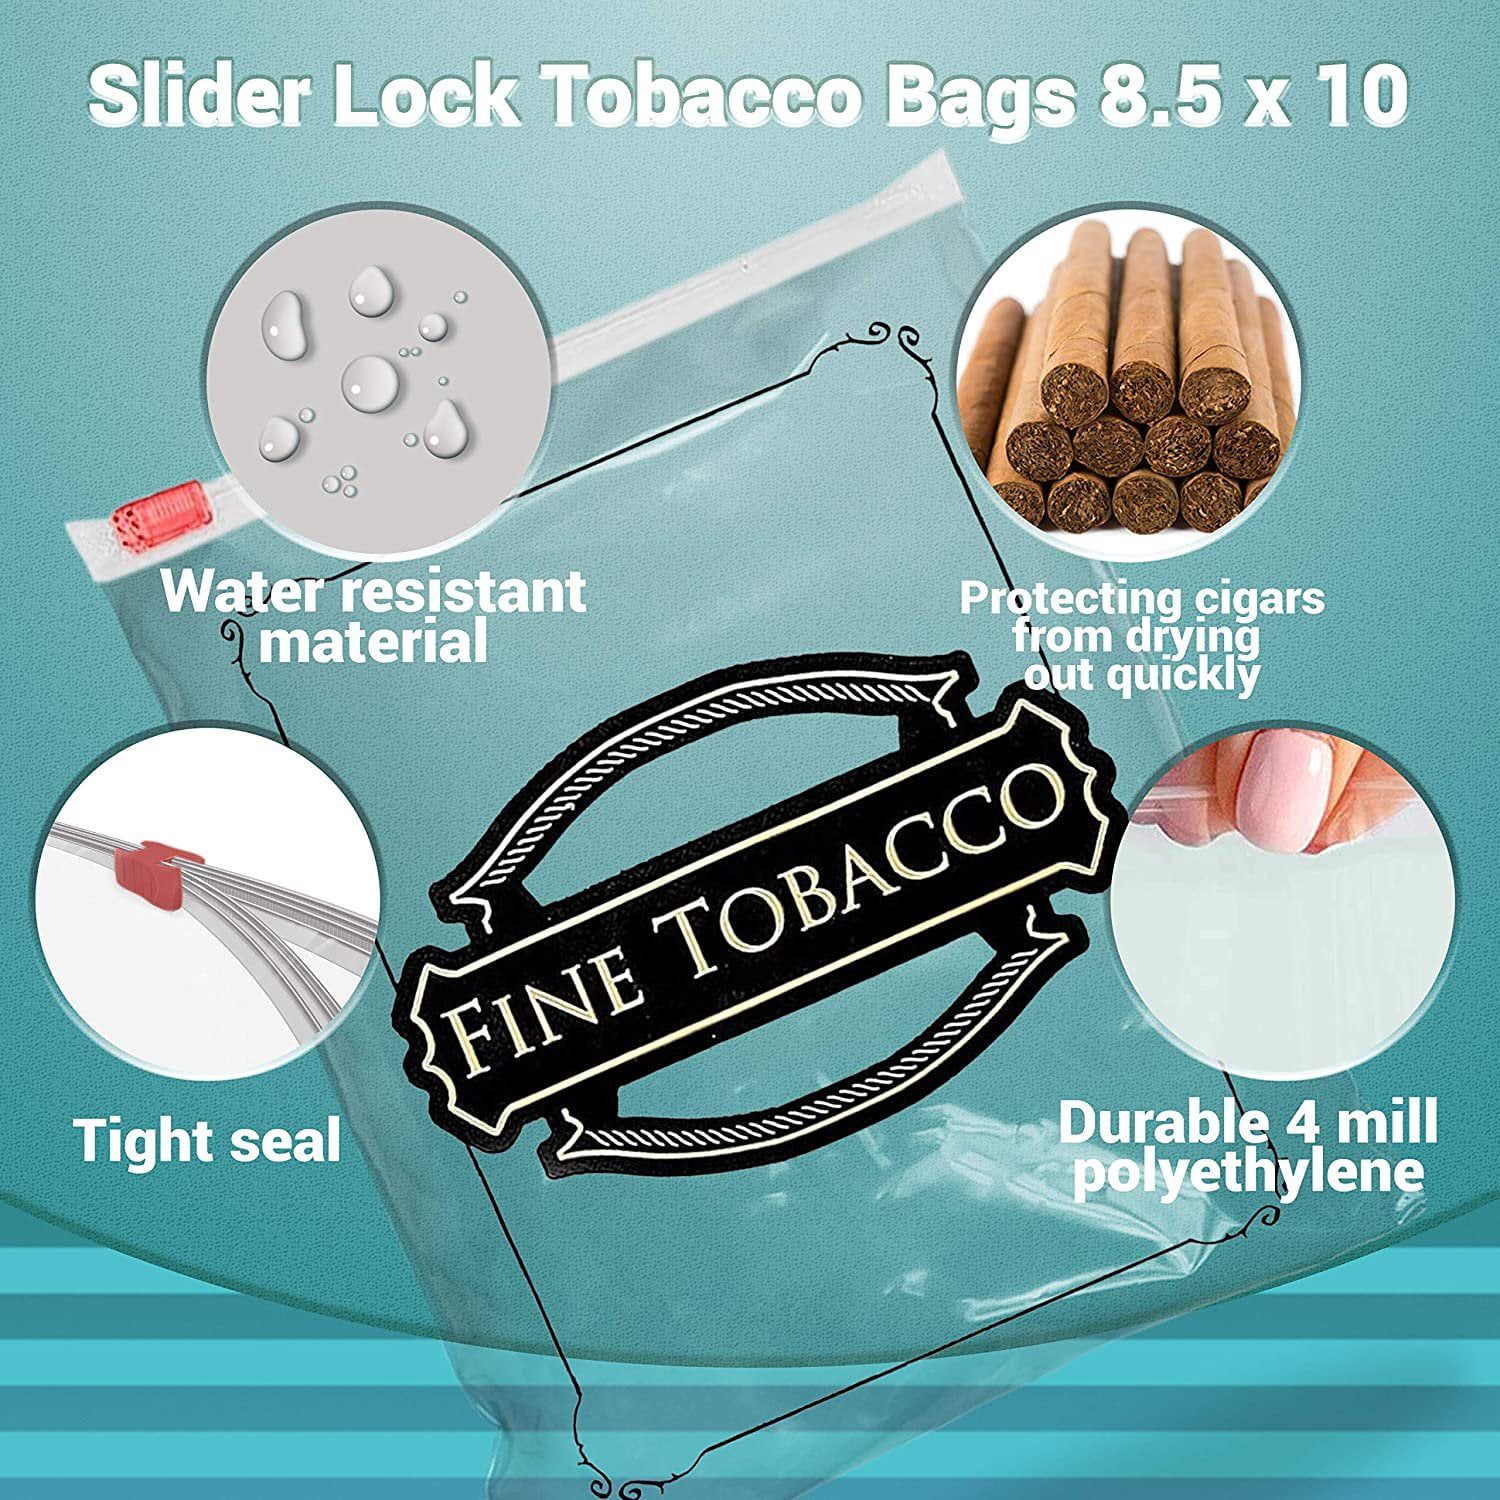 Purevacy Fine Cigars Plastic Cigar Bags Pack of 1000, Clear Plastic Zip Bags 3 x 10 Smoking Accessories, Small Plastic Bags Reclosable 2 mil, Poly